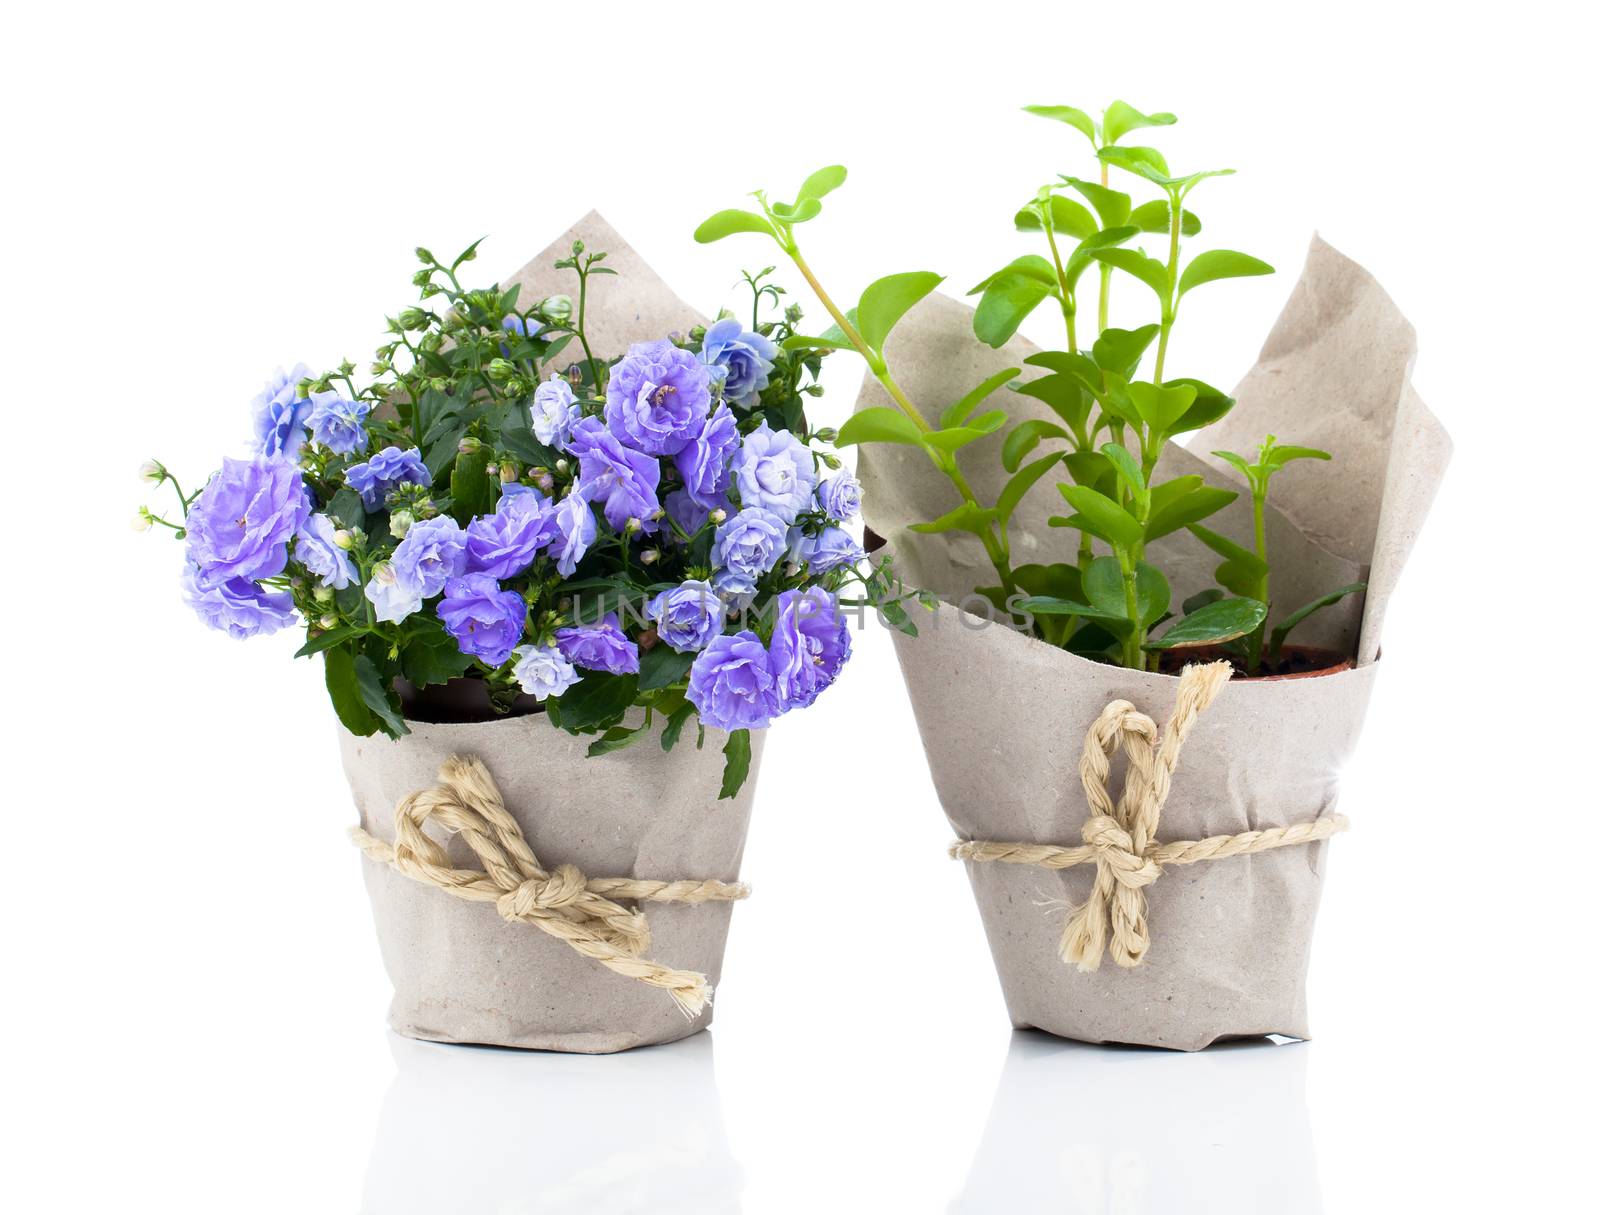 blue Campanula terry flowers in paper packaging, isolated on whi by motorolka